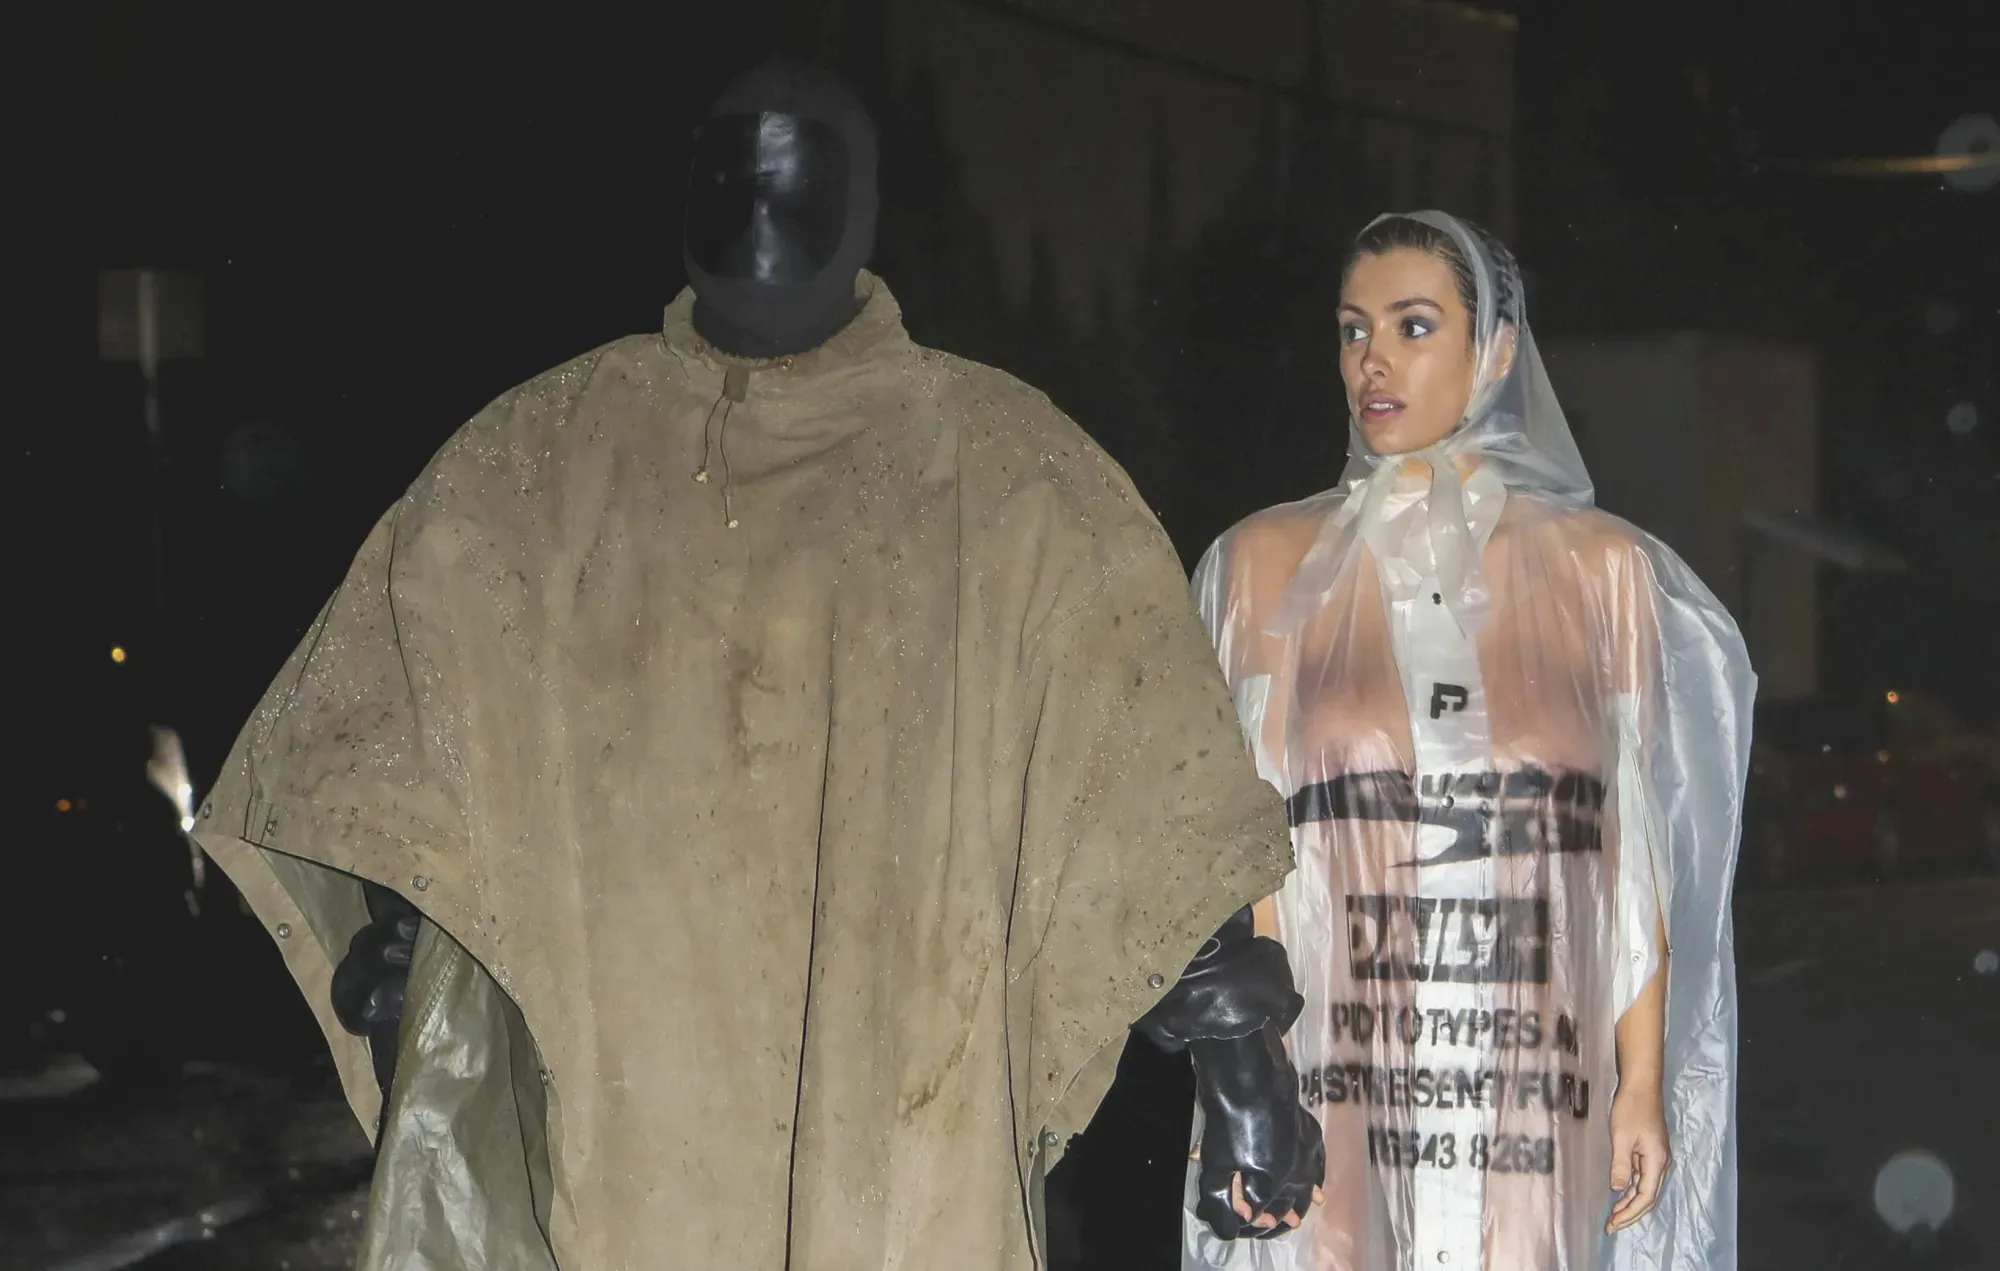 Kanye West and Bianca Censori in the rain of Los Angeles.